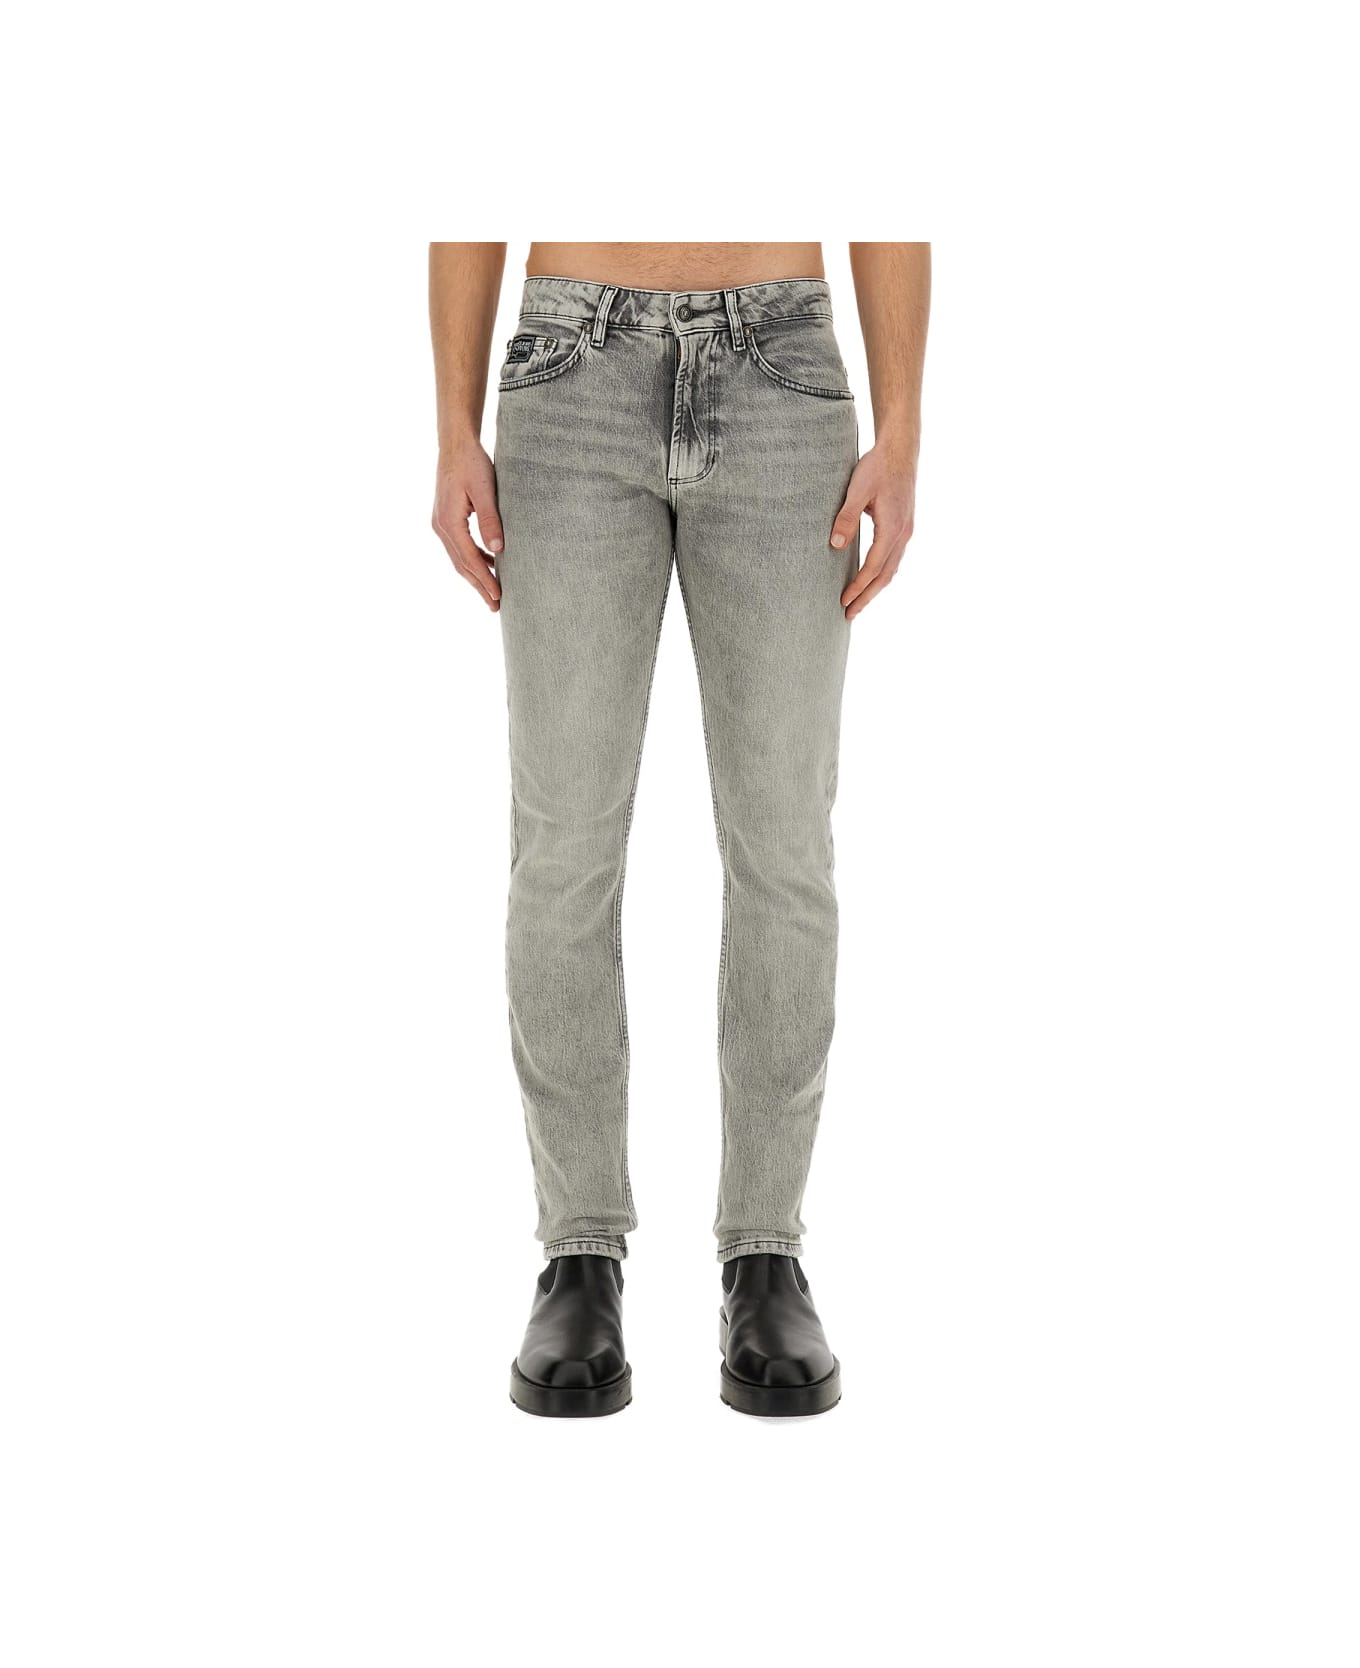 Versace Jeans Couture Slim Fit Jeans - GREY